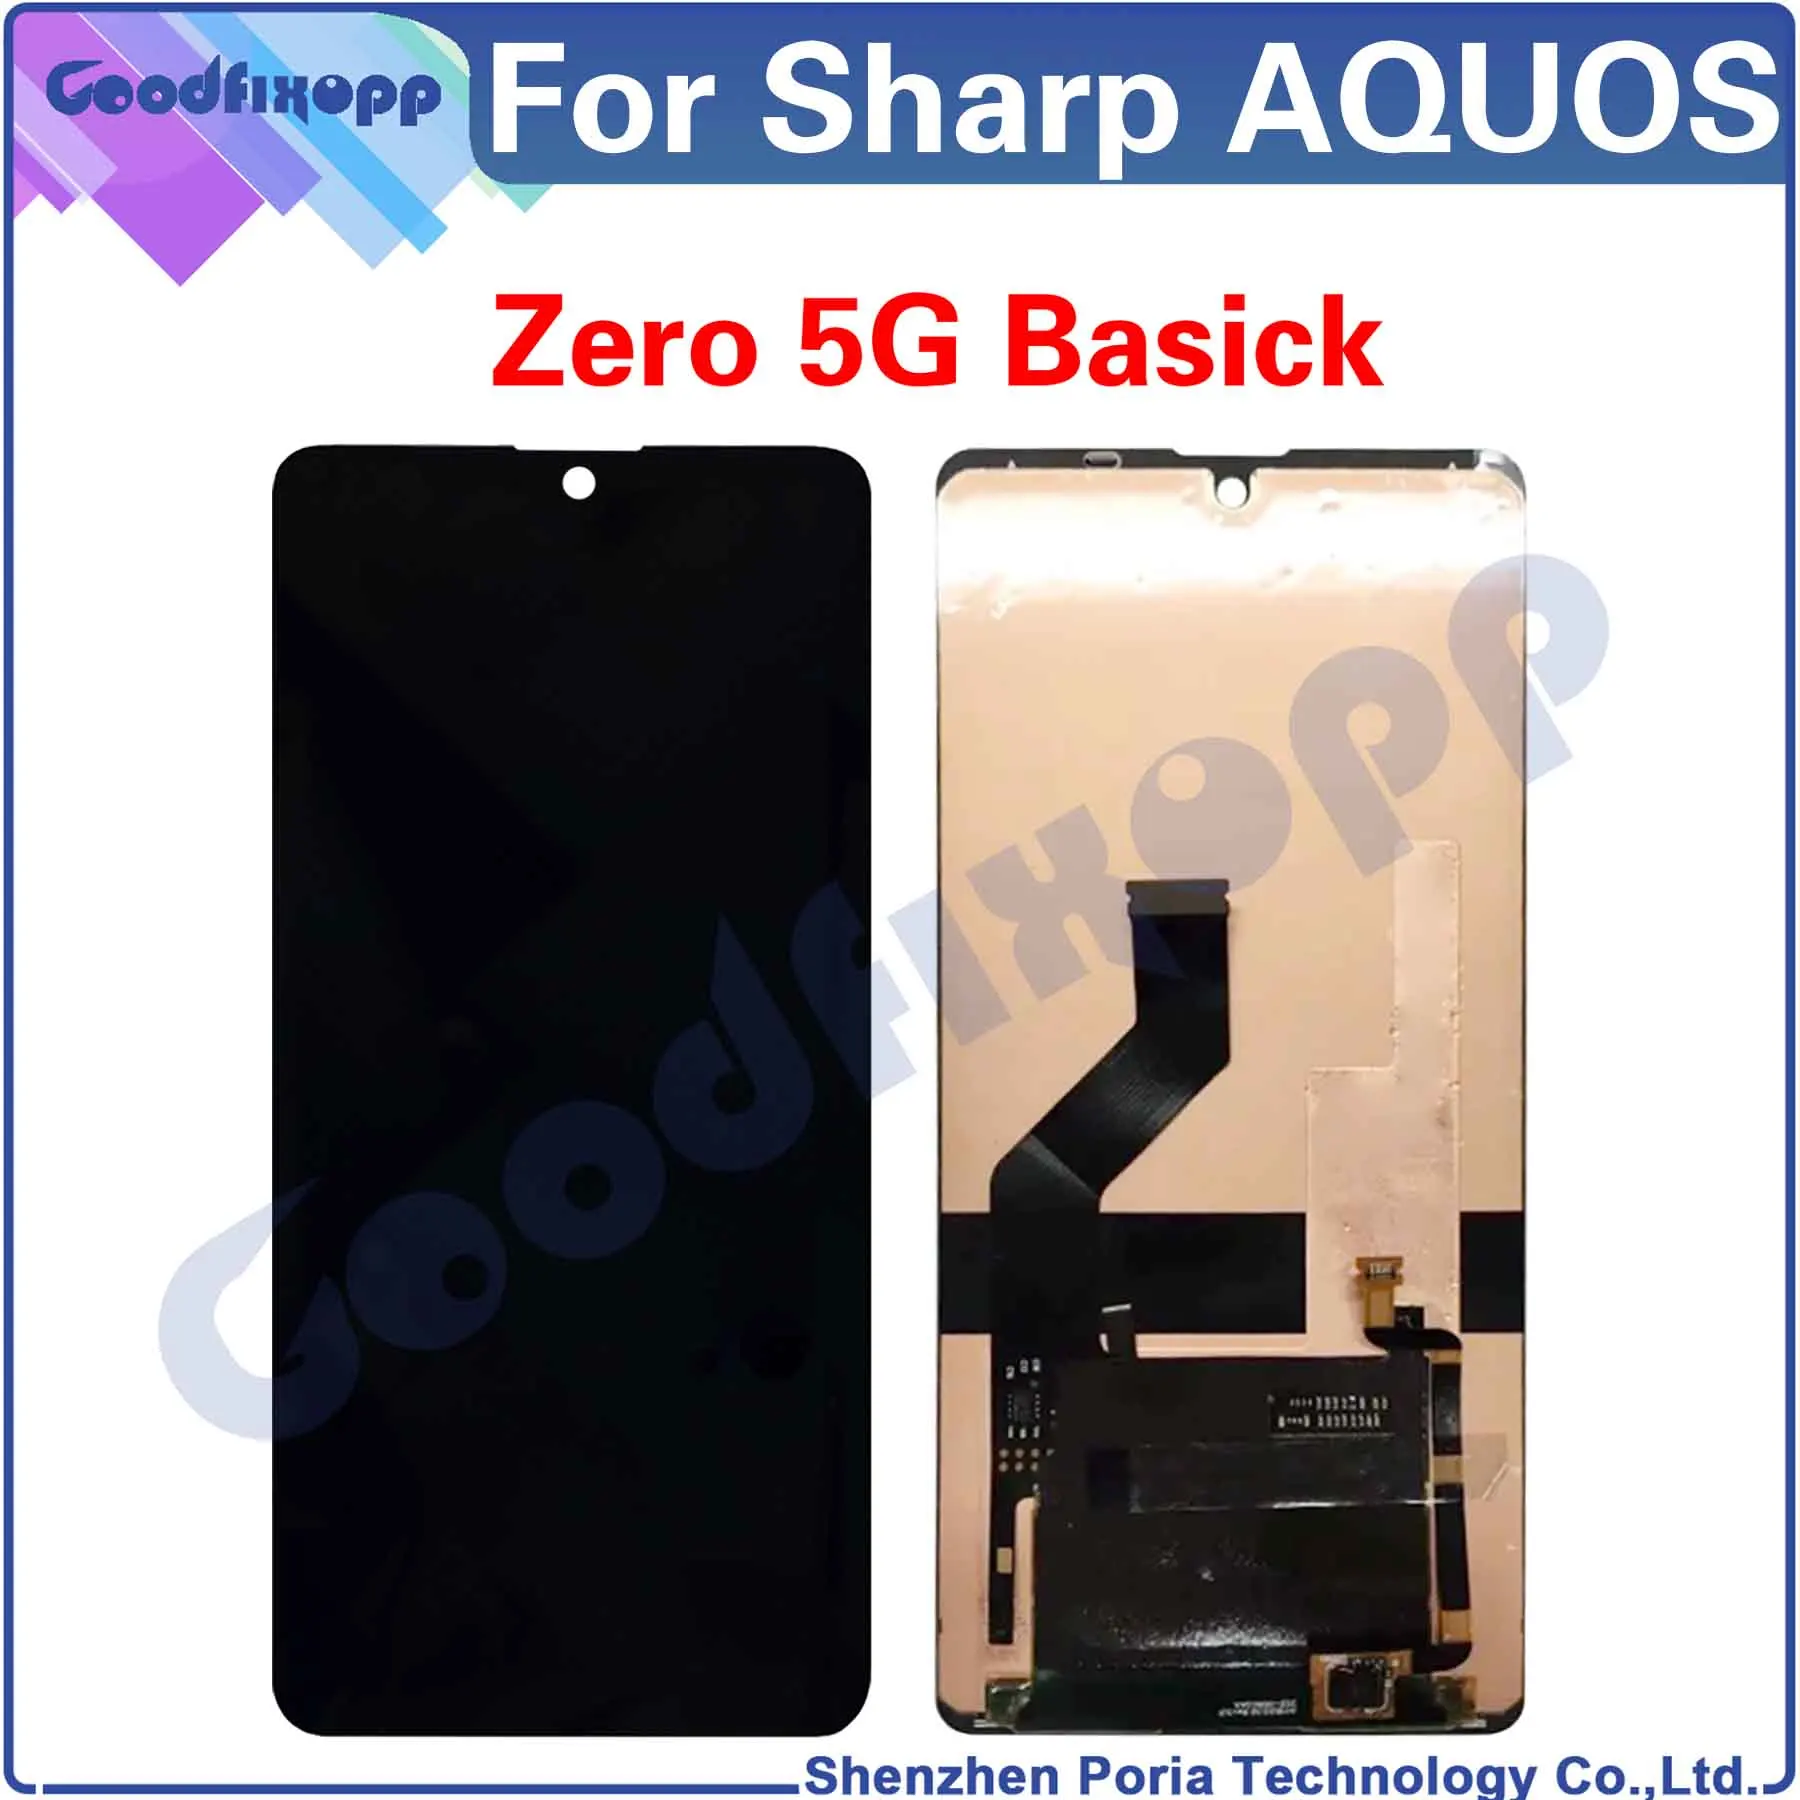 

For Sharp AQUOS Zero 5G Basick LCD Display Touch Screen Digitizer Assembly Repair Parts Replacement